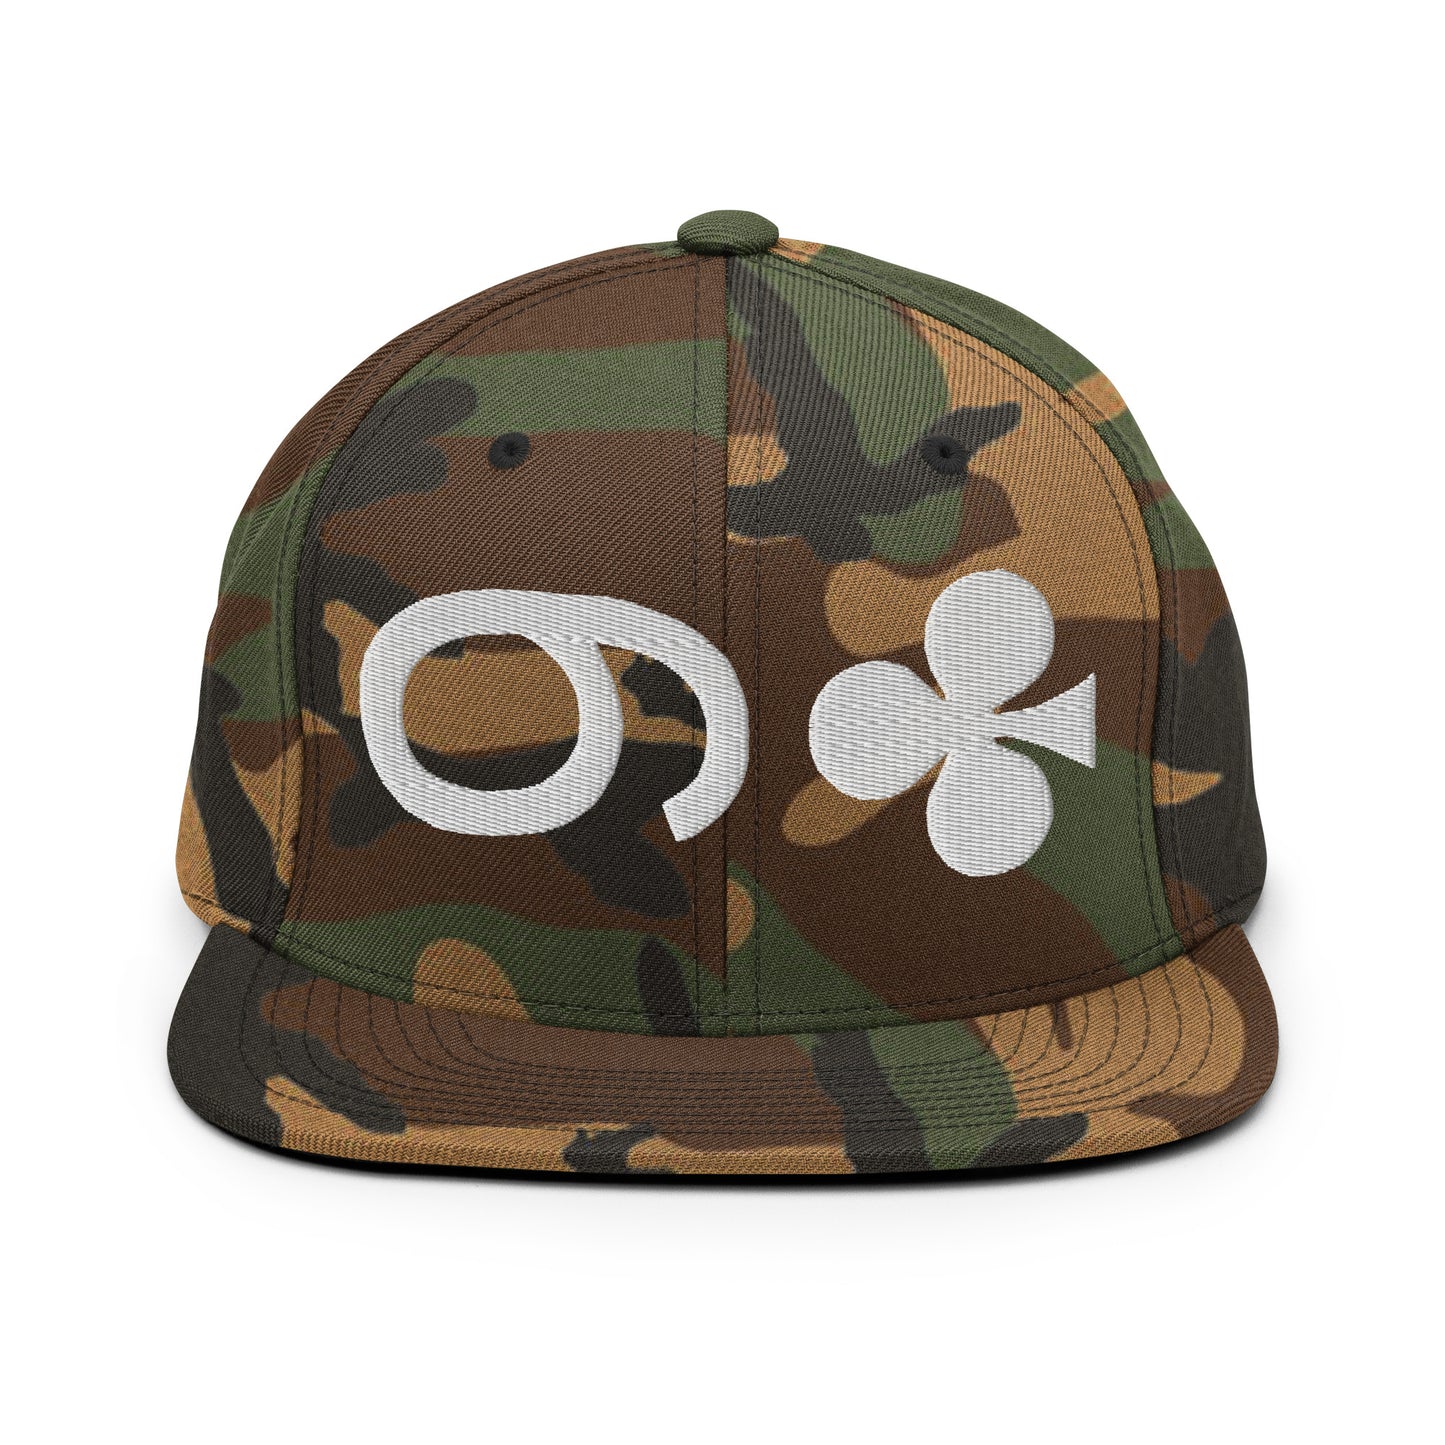 9 of CLUBS Snapback ( White 9 )